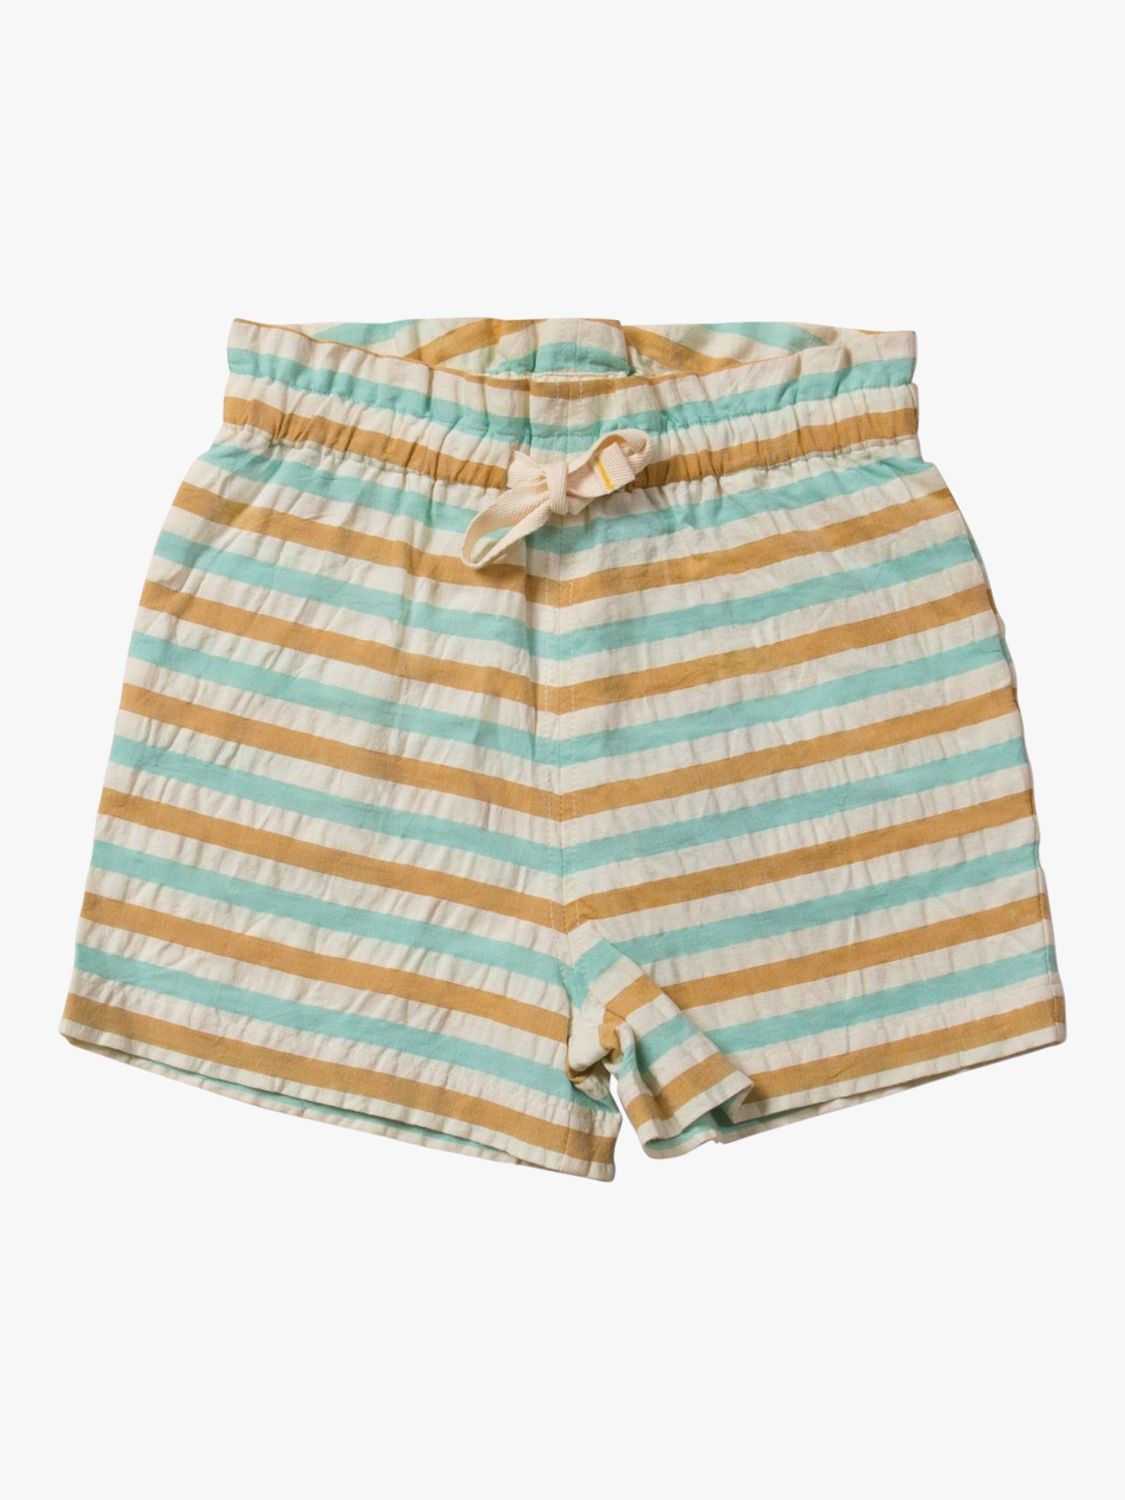 Little Green Radicals Baby Striped Shorts, Multi